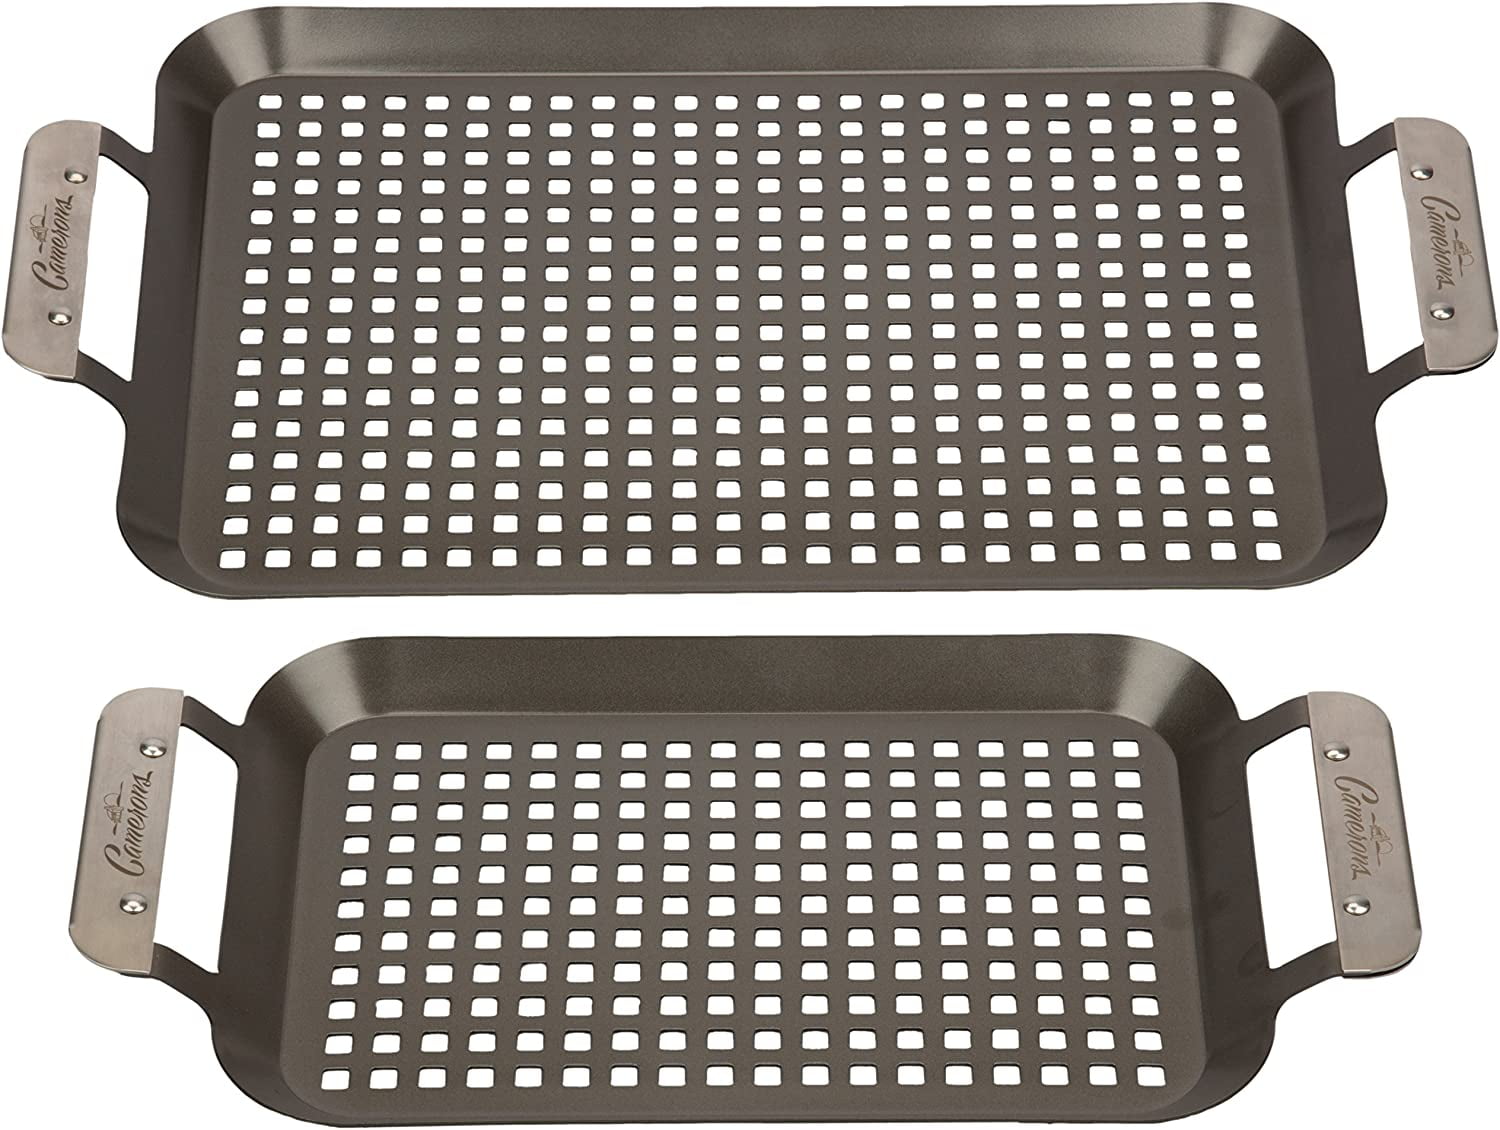 Talon Outdoor 2 Piece Cast Iron Grilling Topper Set For Veggies & Delicate  Foods